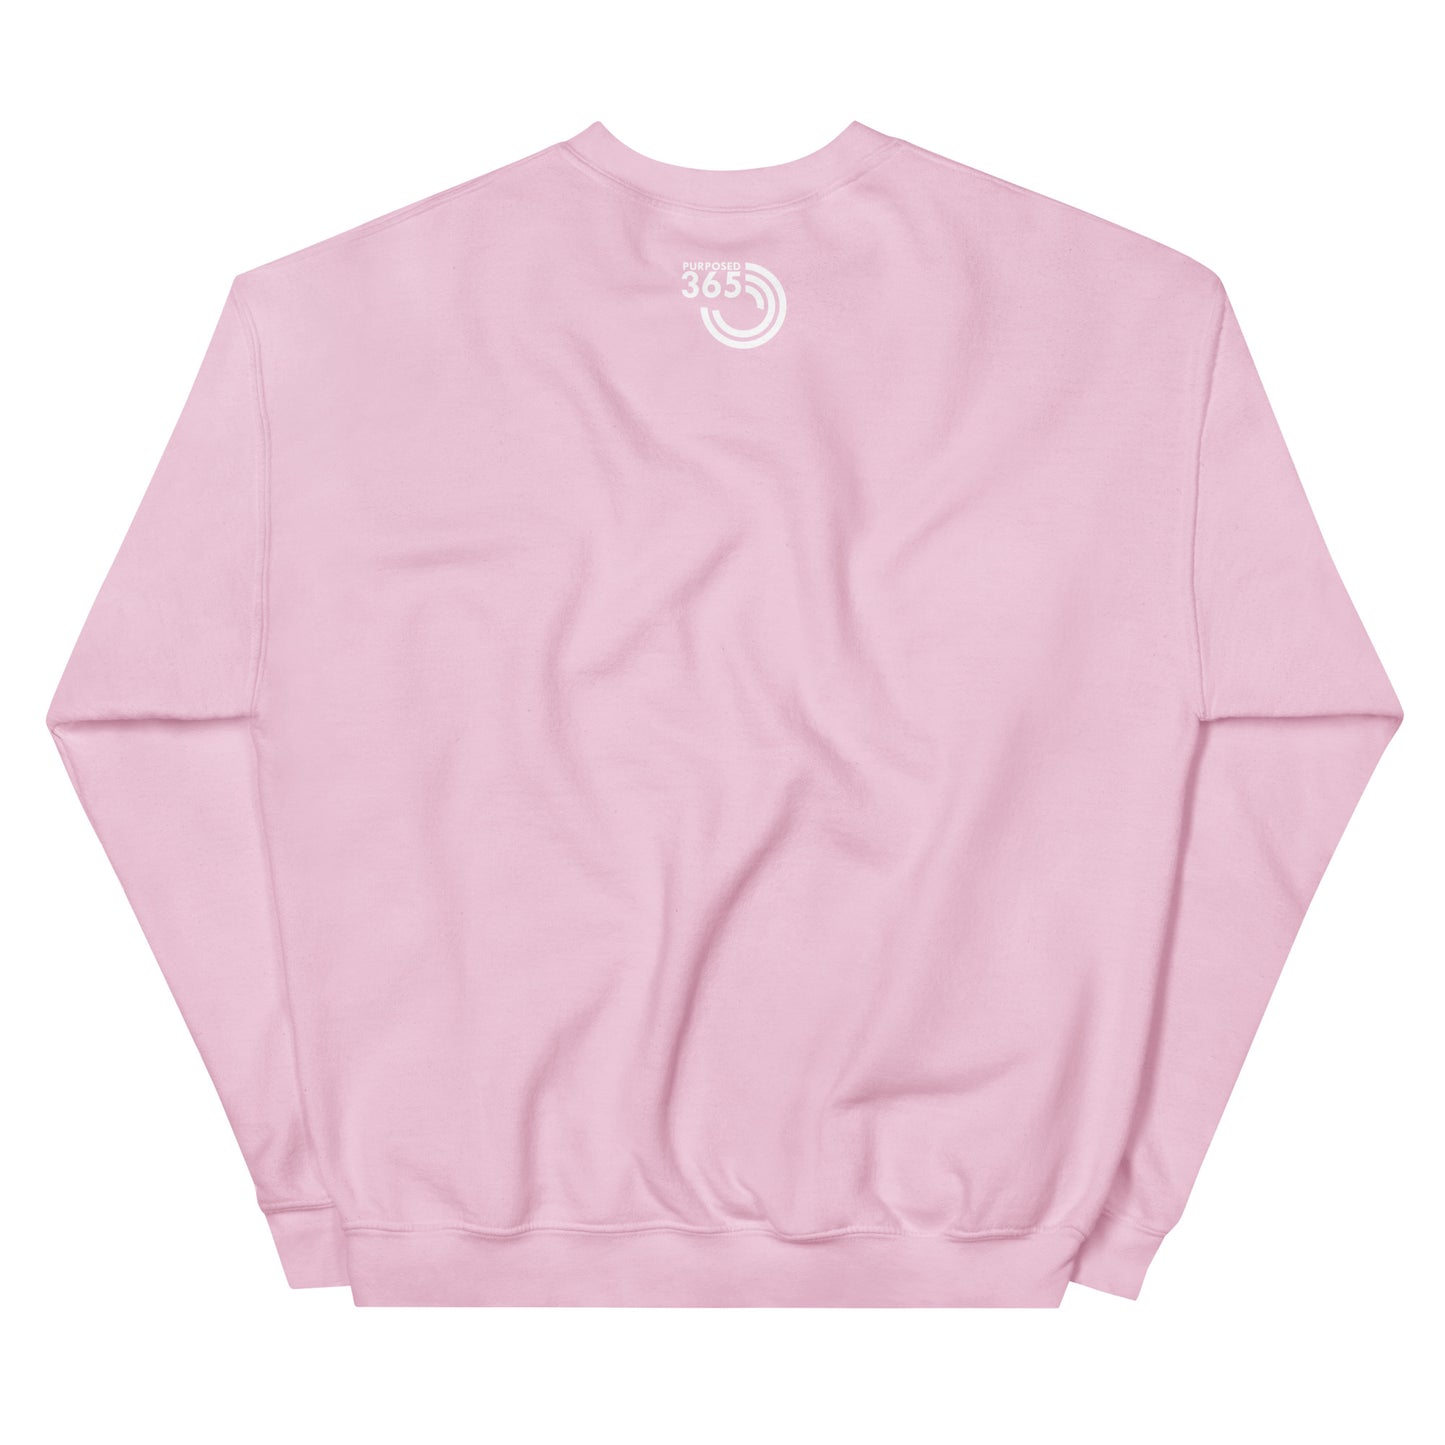 Live With Intentionality Colored Sweatshirt